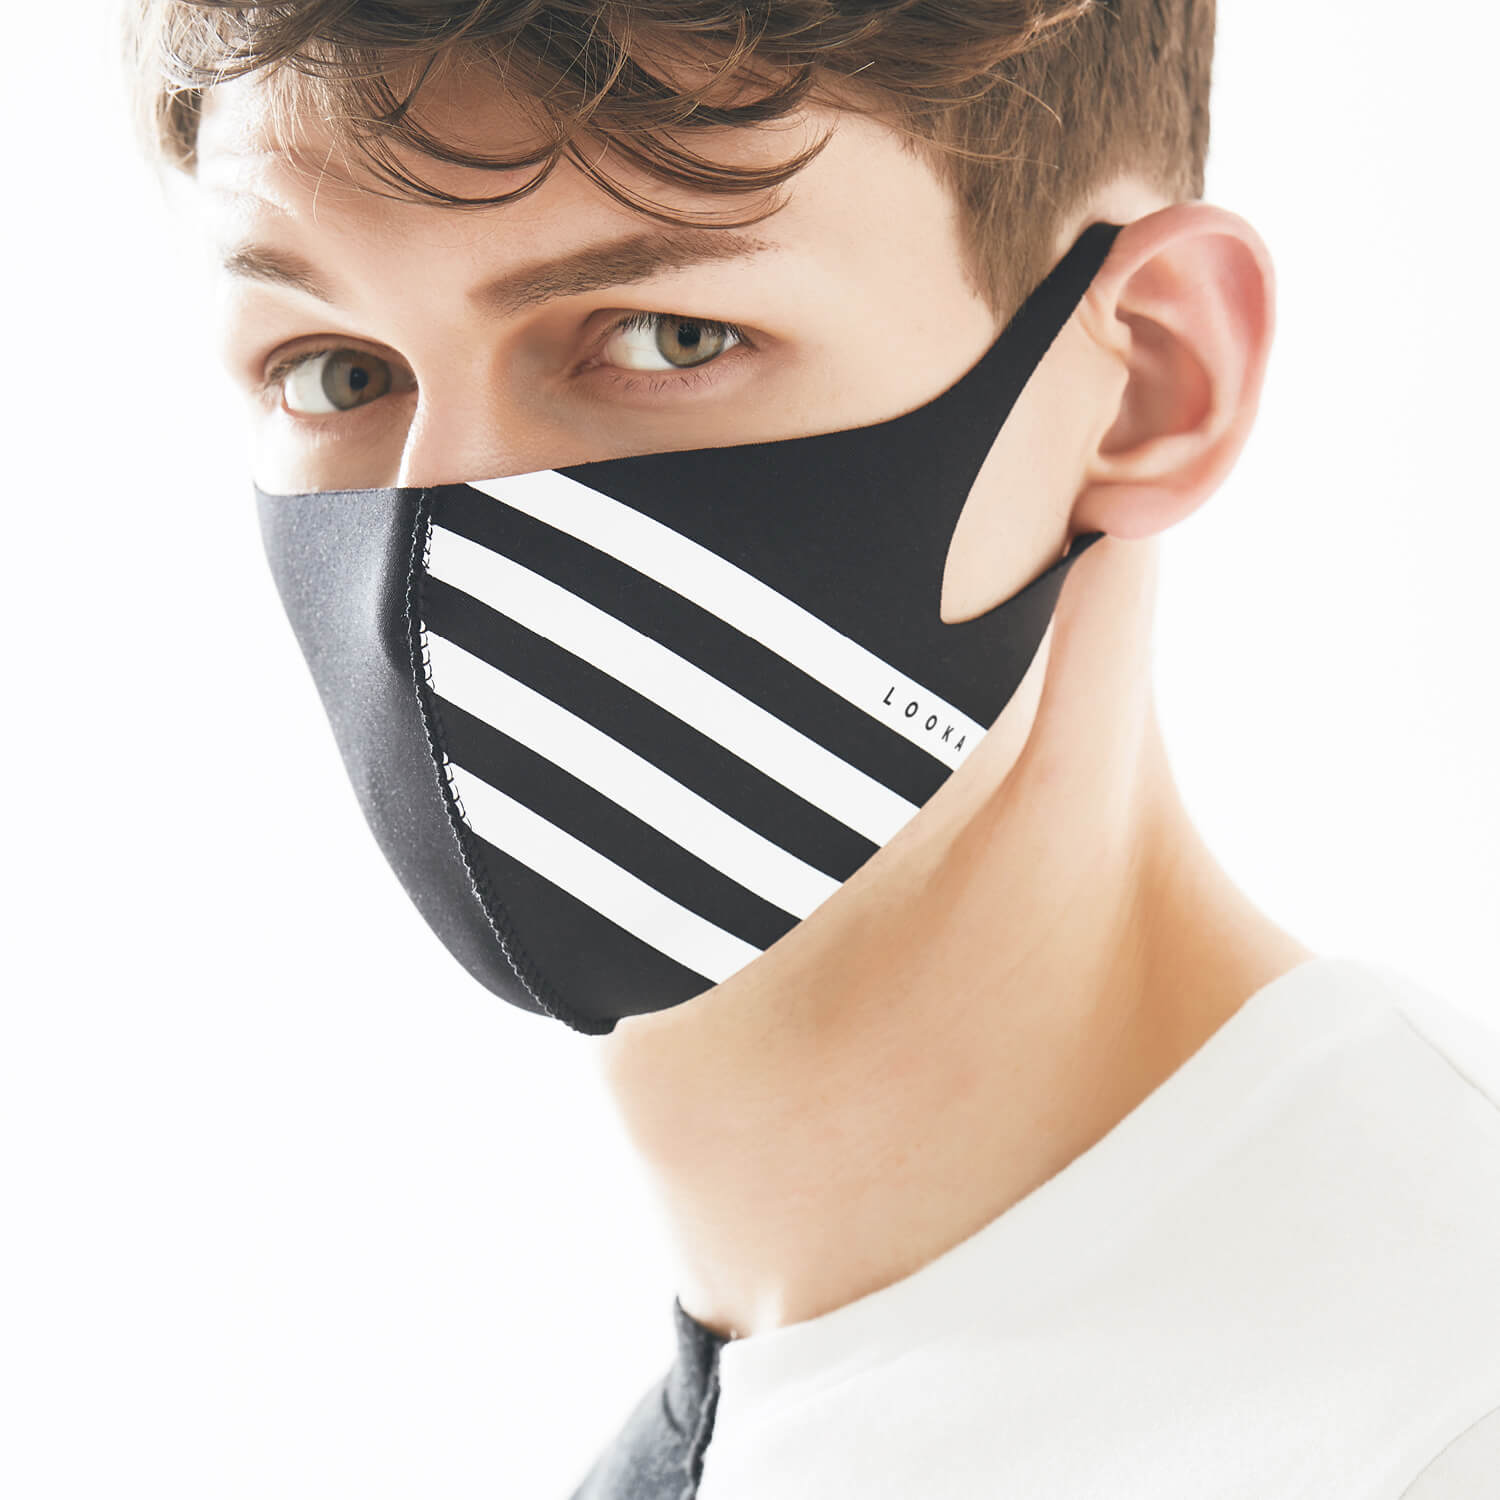 LOOKA MASK Protective Washable and Reusable Air Mask - W4 Black (Made in Korea)